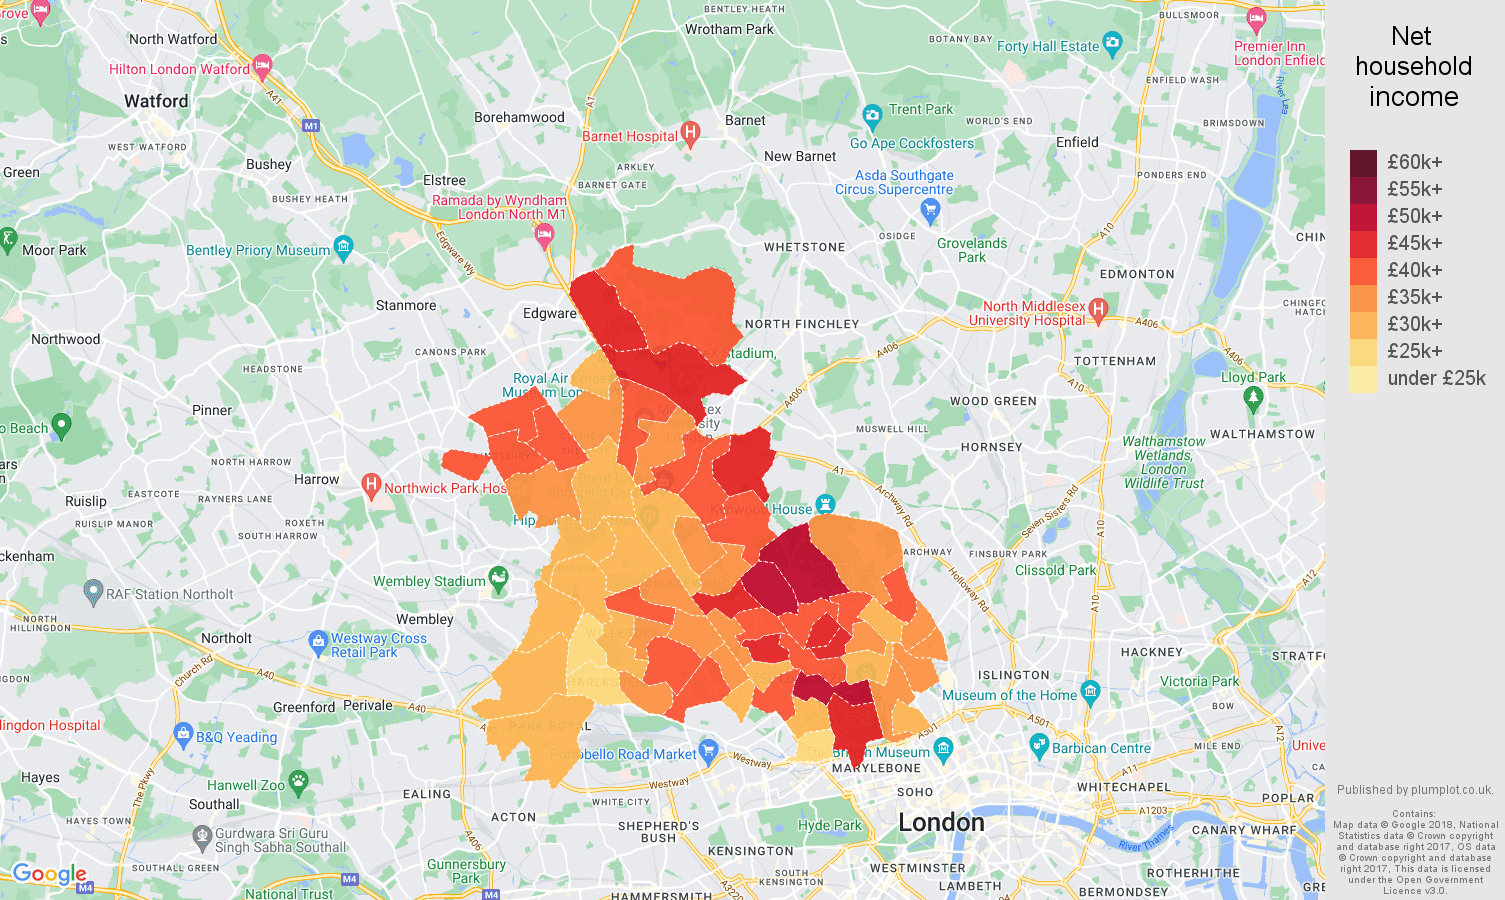 North West London net household income map